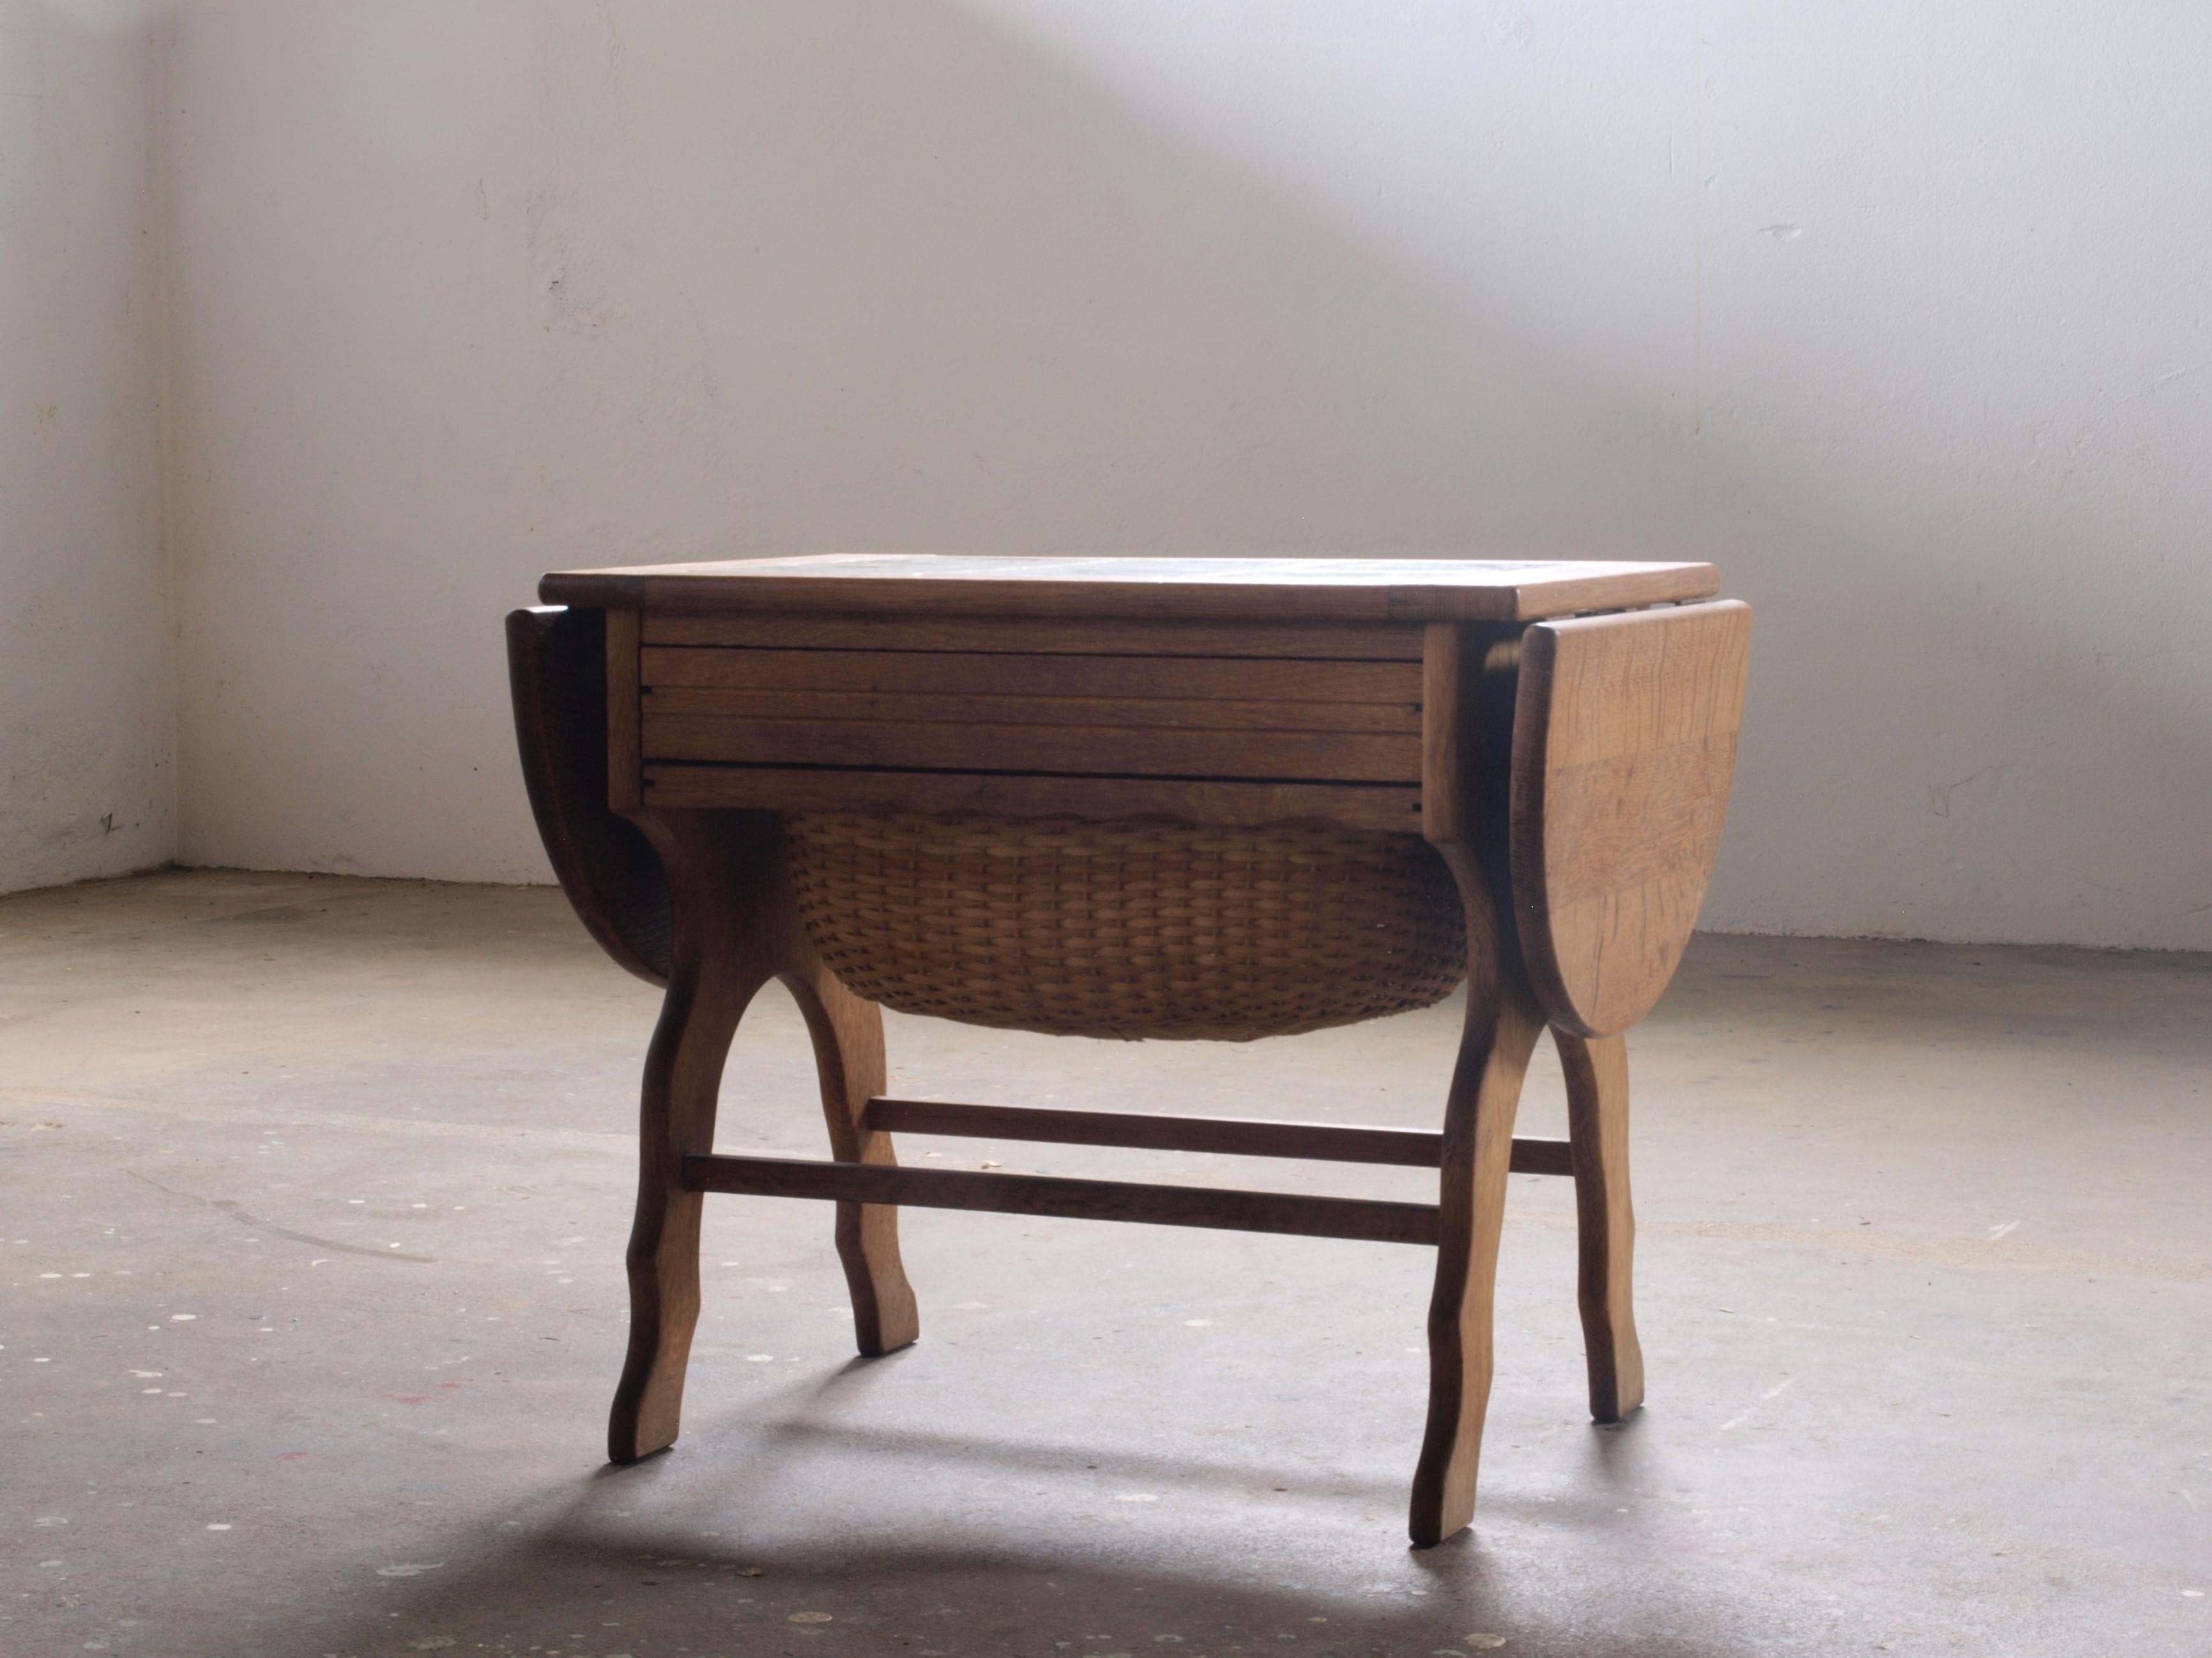 This Danish sewing table, crafted in the 1960s from sturdy oak with a tiled top, showcases solid craftsmanship. Featuring a drawer with storage and an extendable wicker basket, it adapts to various uses. The table's size adjusts from 60 cm to 84 cm,